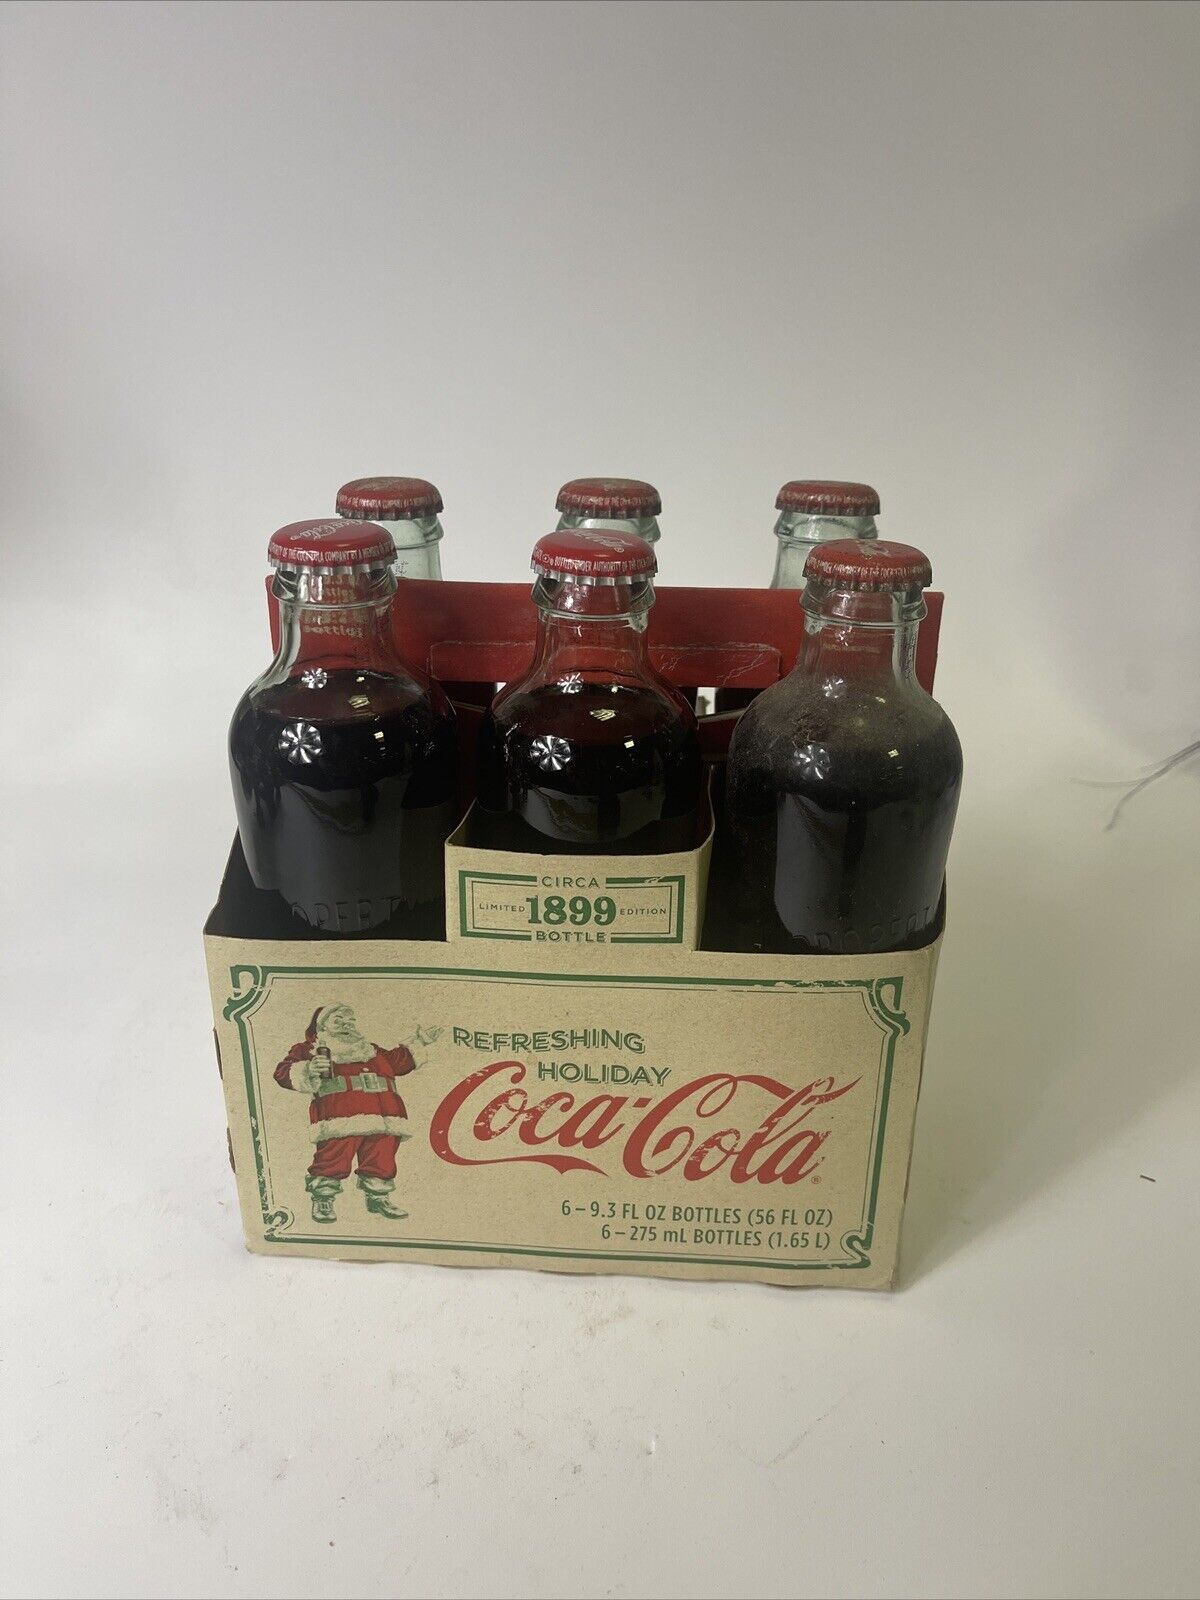 Circa Limited 1899 Edition Bottle Refreshing Holiday Coca-Cola 6 Bottles